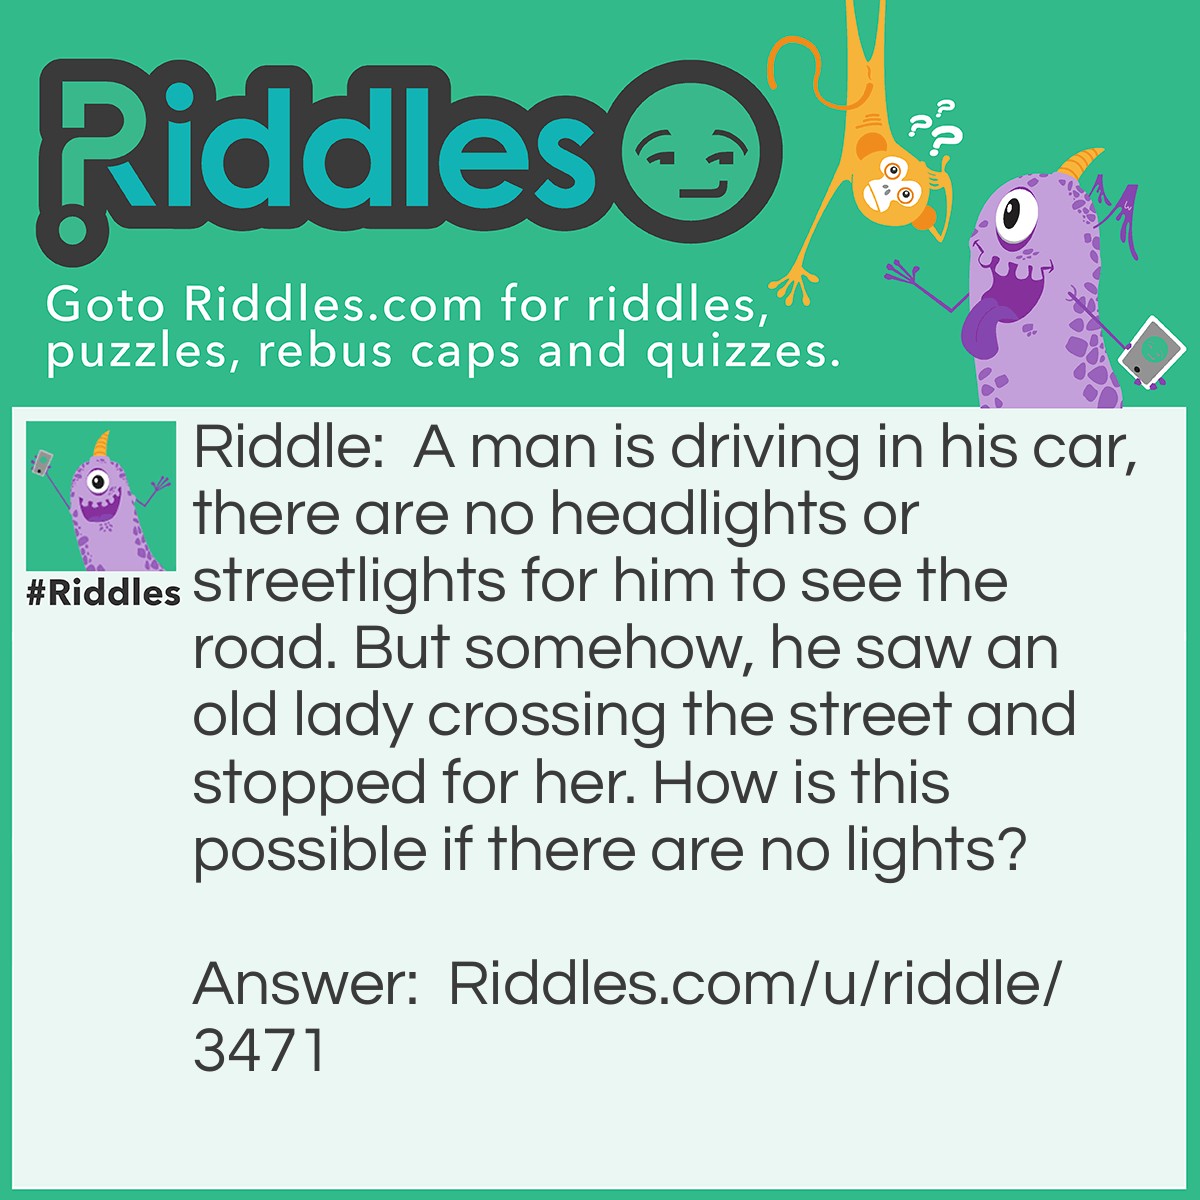 Riddle: A man is driving in his car, there are no headlights or streetlights for him to see the road. But somehow, he saw an old lady crossing the street and stopped for her. How is this possible if there are no lights? Answer: It was daytime!!